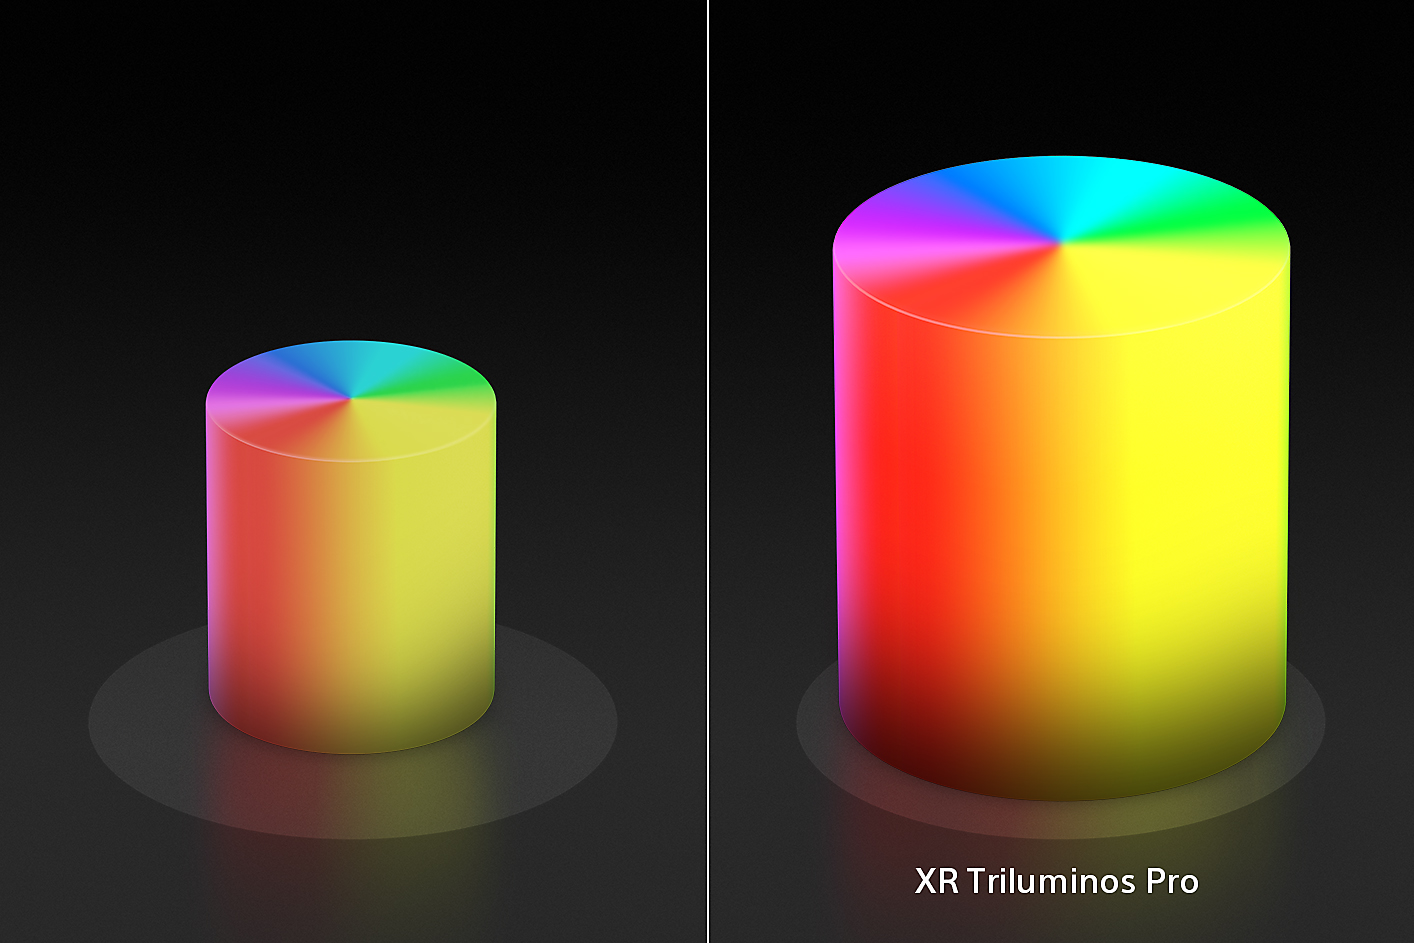 Split screen showing two candle-shaped cones of colour, a smaller one on the left and a larger one on the right with the enhanced colours and textures of XR Triluminos Pro